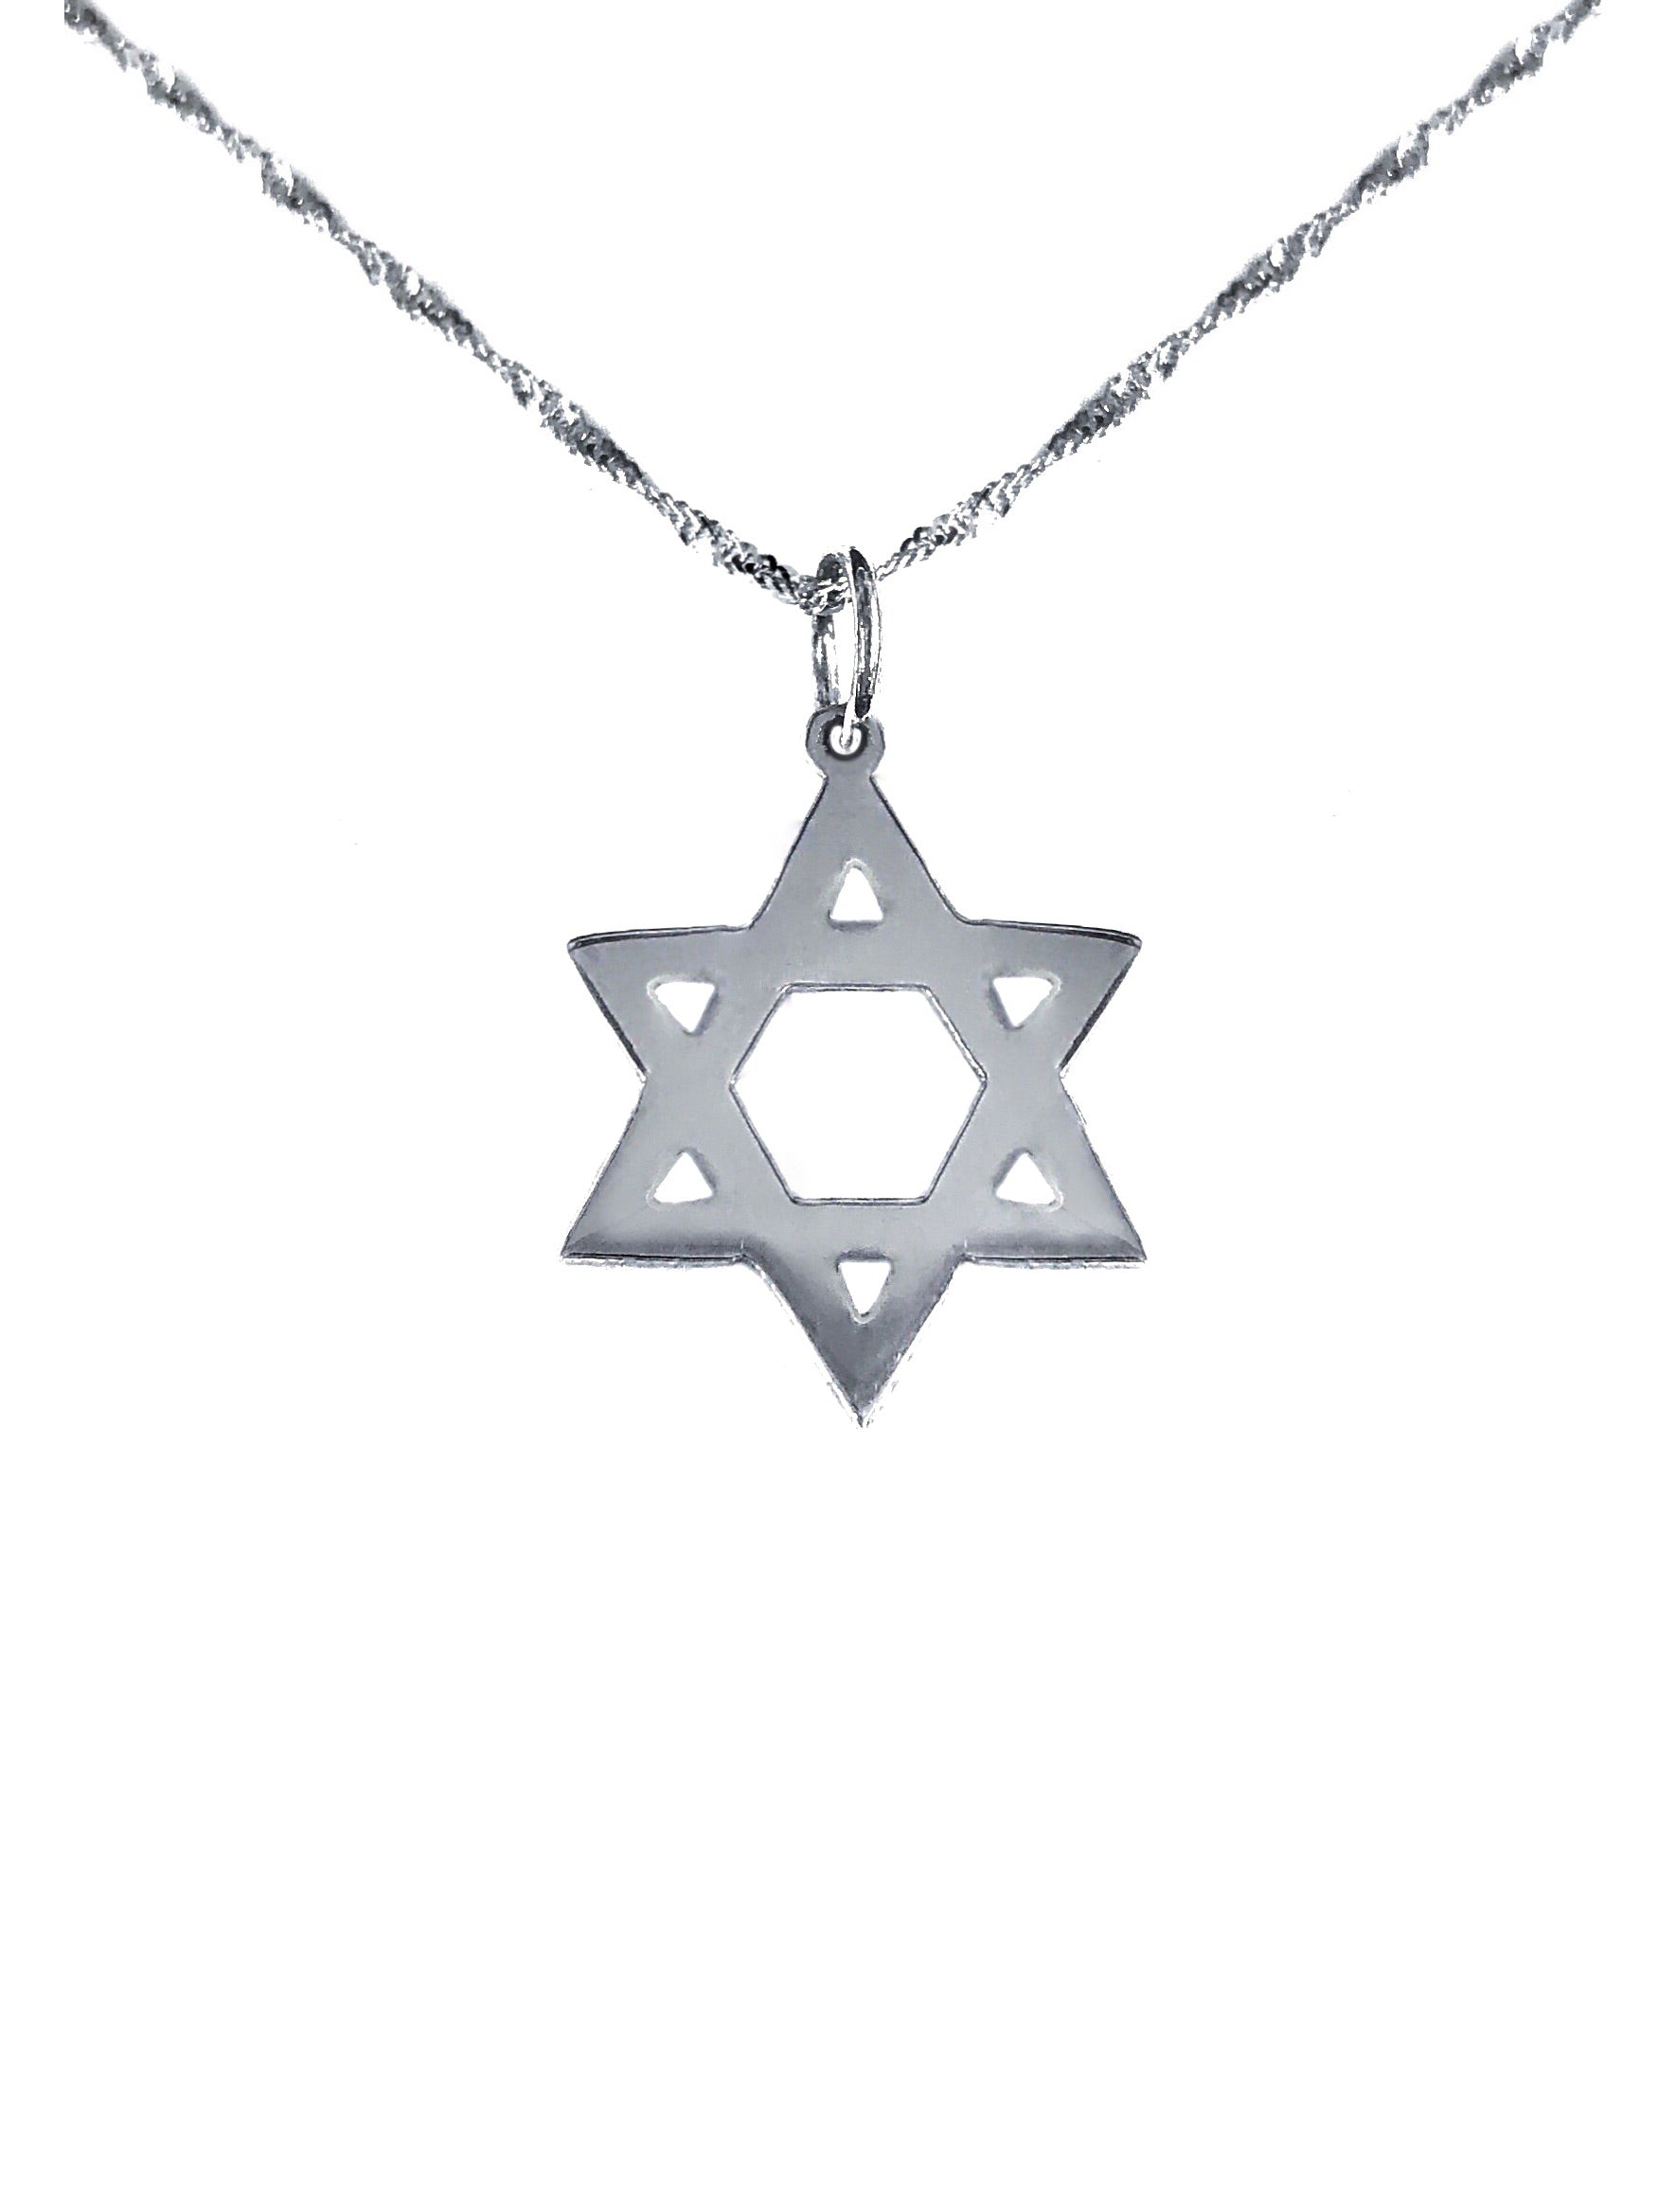 POLISHED HAND-CUT STAR OF DAVID NECKLACE -WHITE GOLD